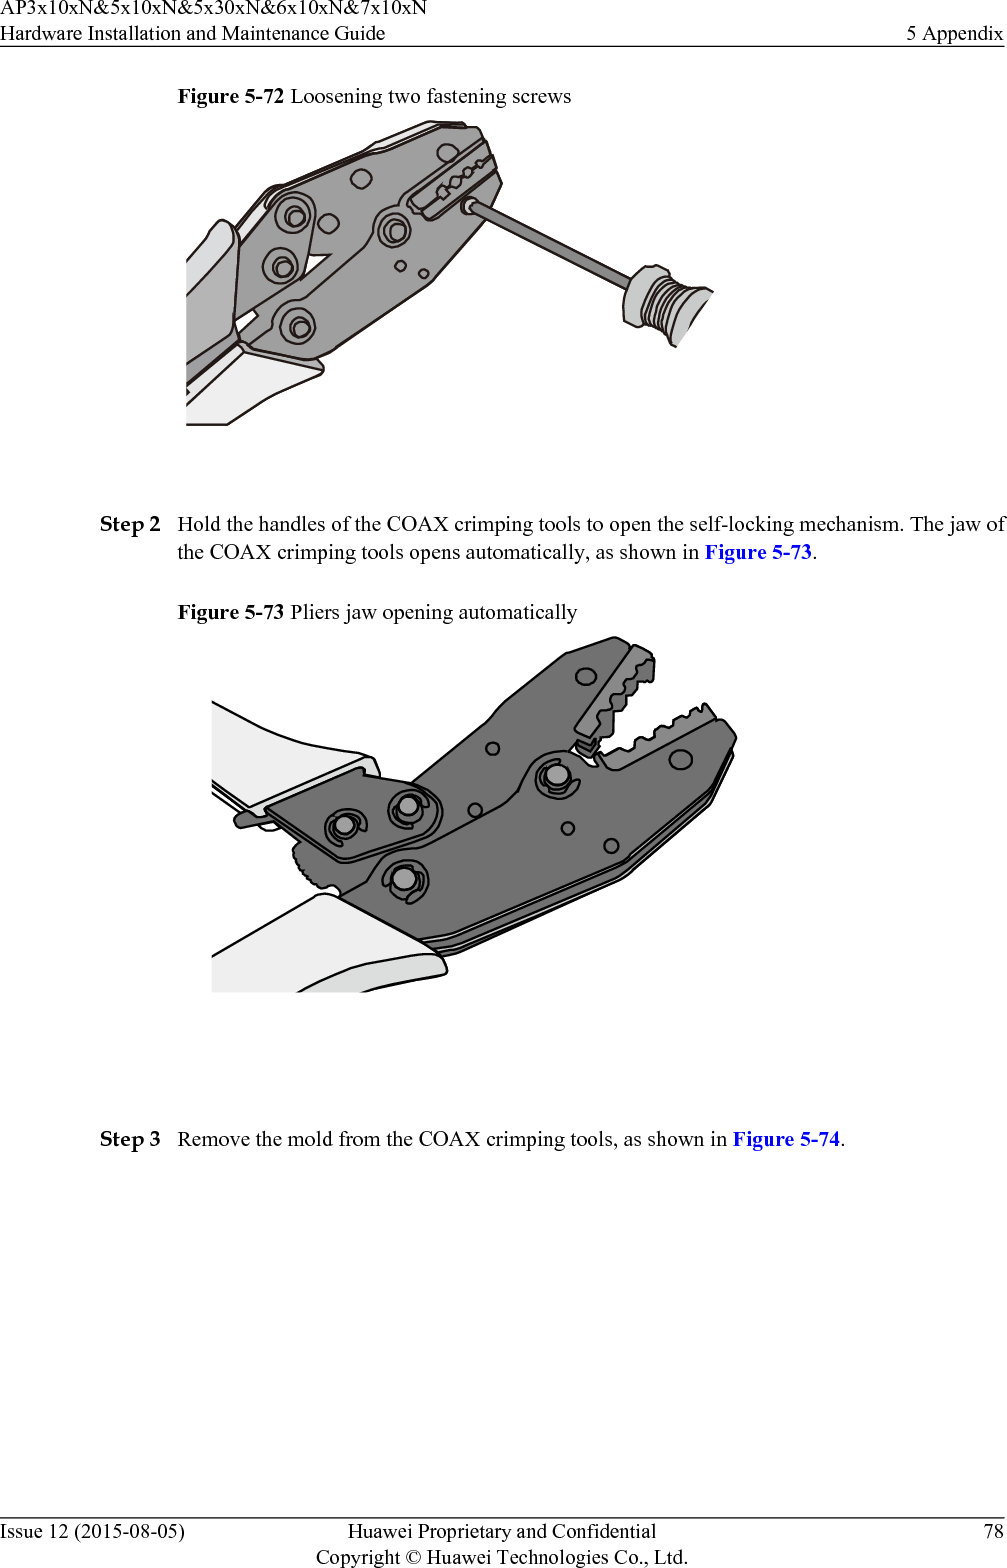 Figure 5-72 Loosening two fastening screws Step 2 Hold the handles of the COAX crimping tools to open the self-locking mechanism. The jaw ofthe COAX crimping tools opens automatically, as shown in Figure 5-73.Figure 5-73 Pliers jaw opening automatically Step 3 Remove the mold from the COAX crimping tools, as shown in Figure 5-74.AP3x10xN&amp;5x10xN&amp;5x30xN&amp;6x10xN&amp;7x10xNHardware Installation and Maintenance Guide 5 AppendixIssue 12 (2015-08-05) Huawei Proprietary and ConfidentialCopyright © Huawei Technologies Co., Ltd.78